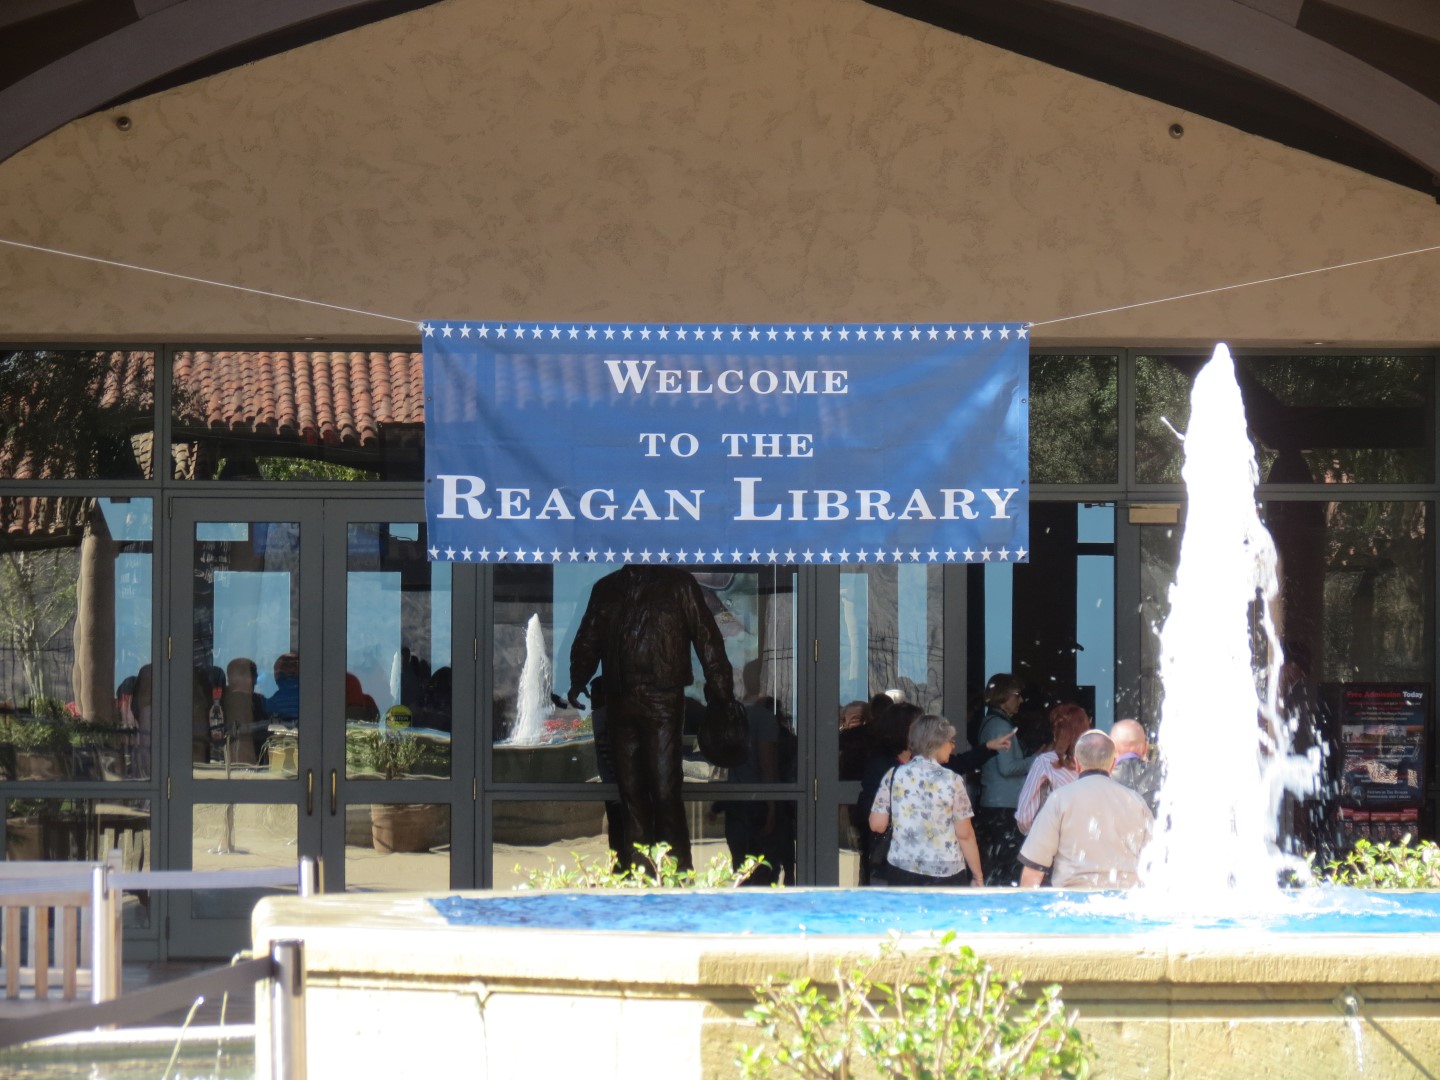 Ronald Reagan library and museum  1 of 2 (#IMG_2037)